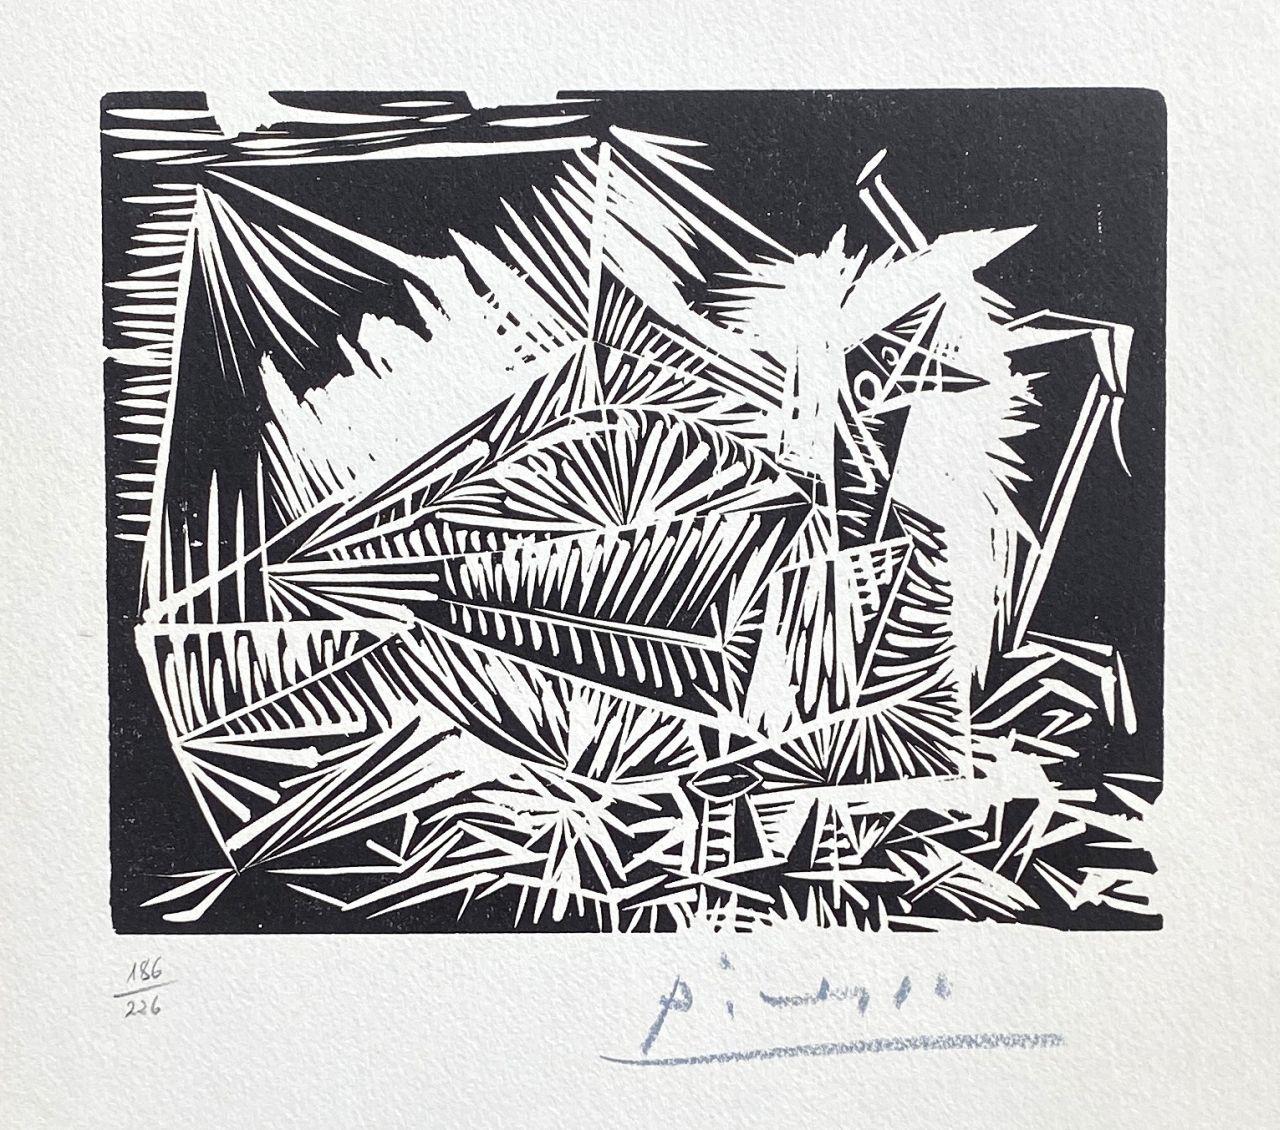 The Dove (Le Pigeonneau) - Original Linocut Hand Signed & Numbered (Bloch #326) - Print by Pablo Picasso